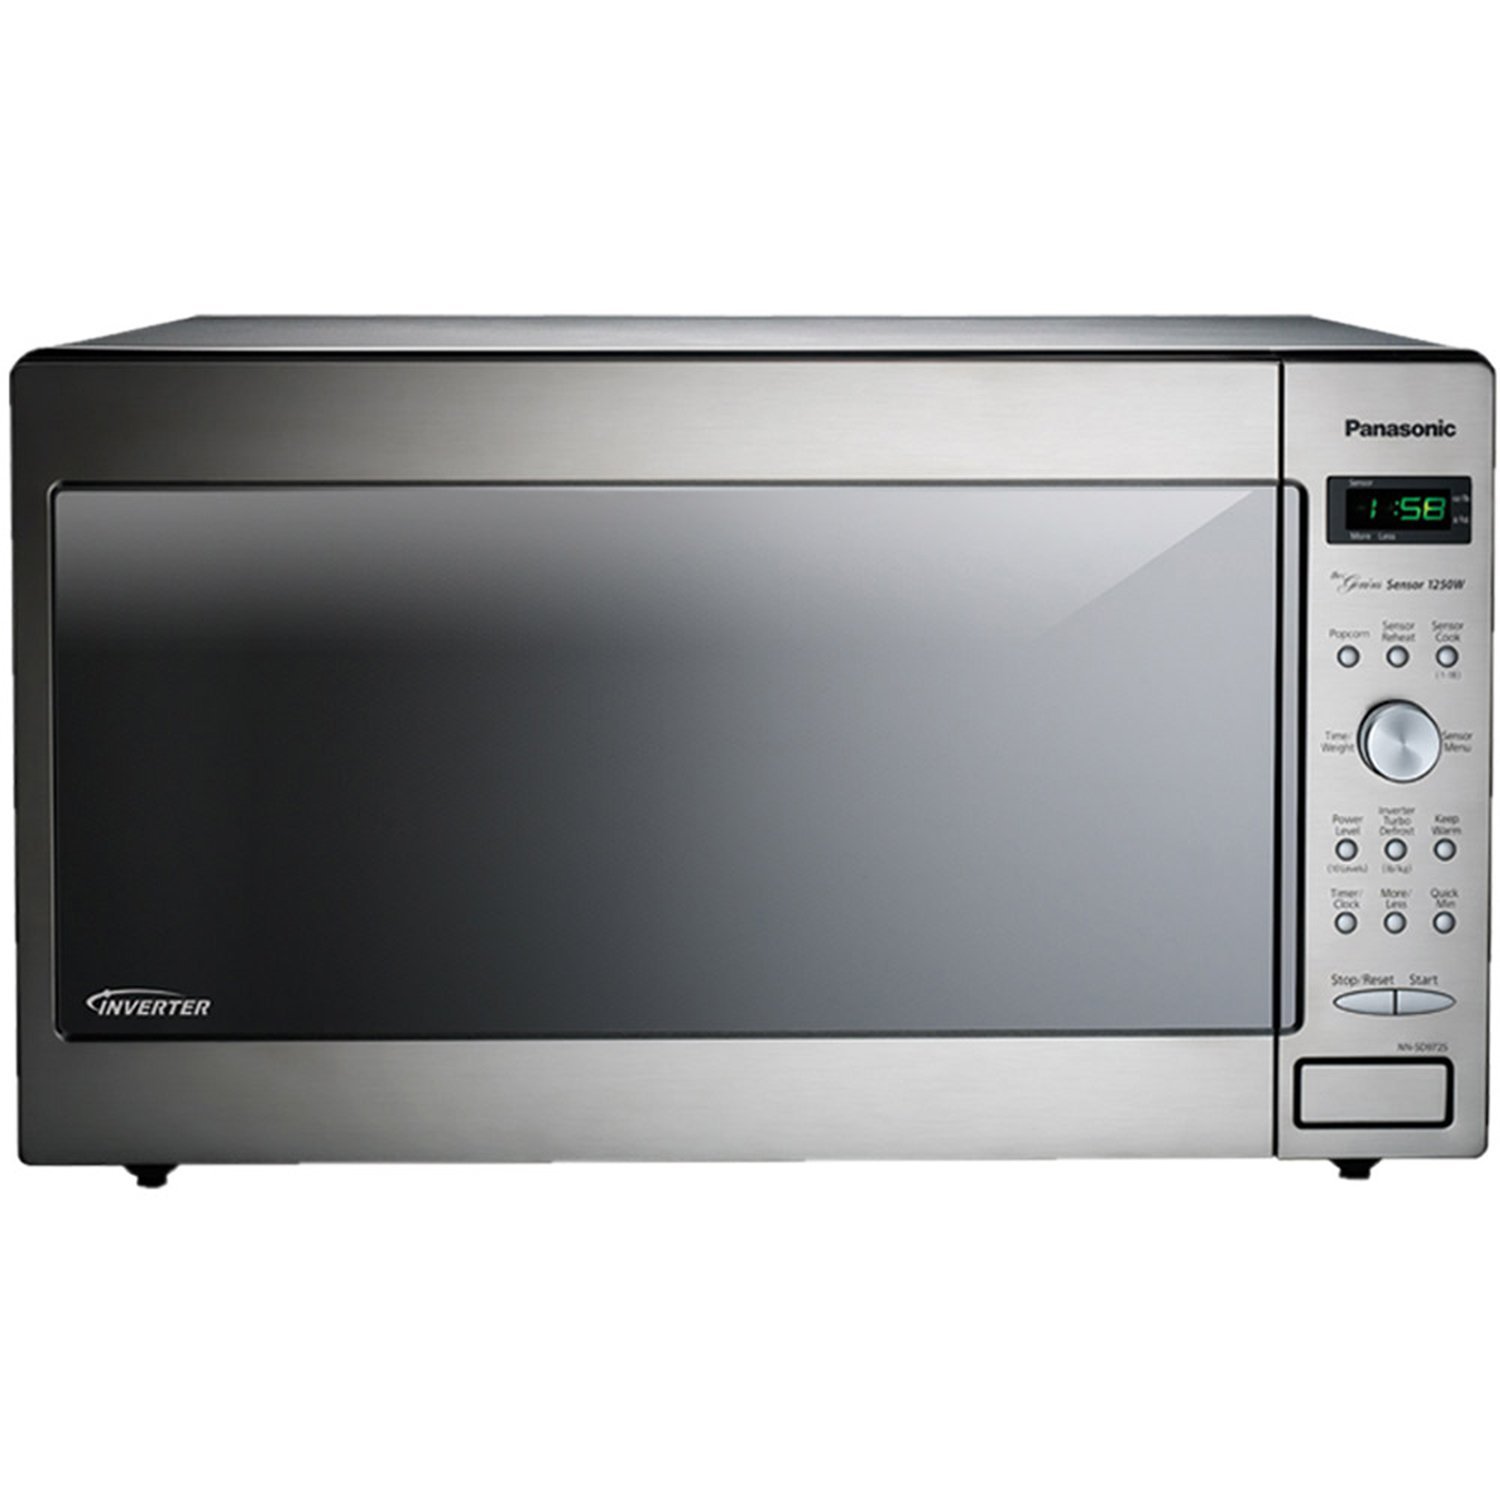 Panasonic NN-SD972S Stainless 1250W 2.2 Cu. Ft. Countertop/Built-in